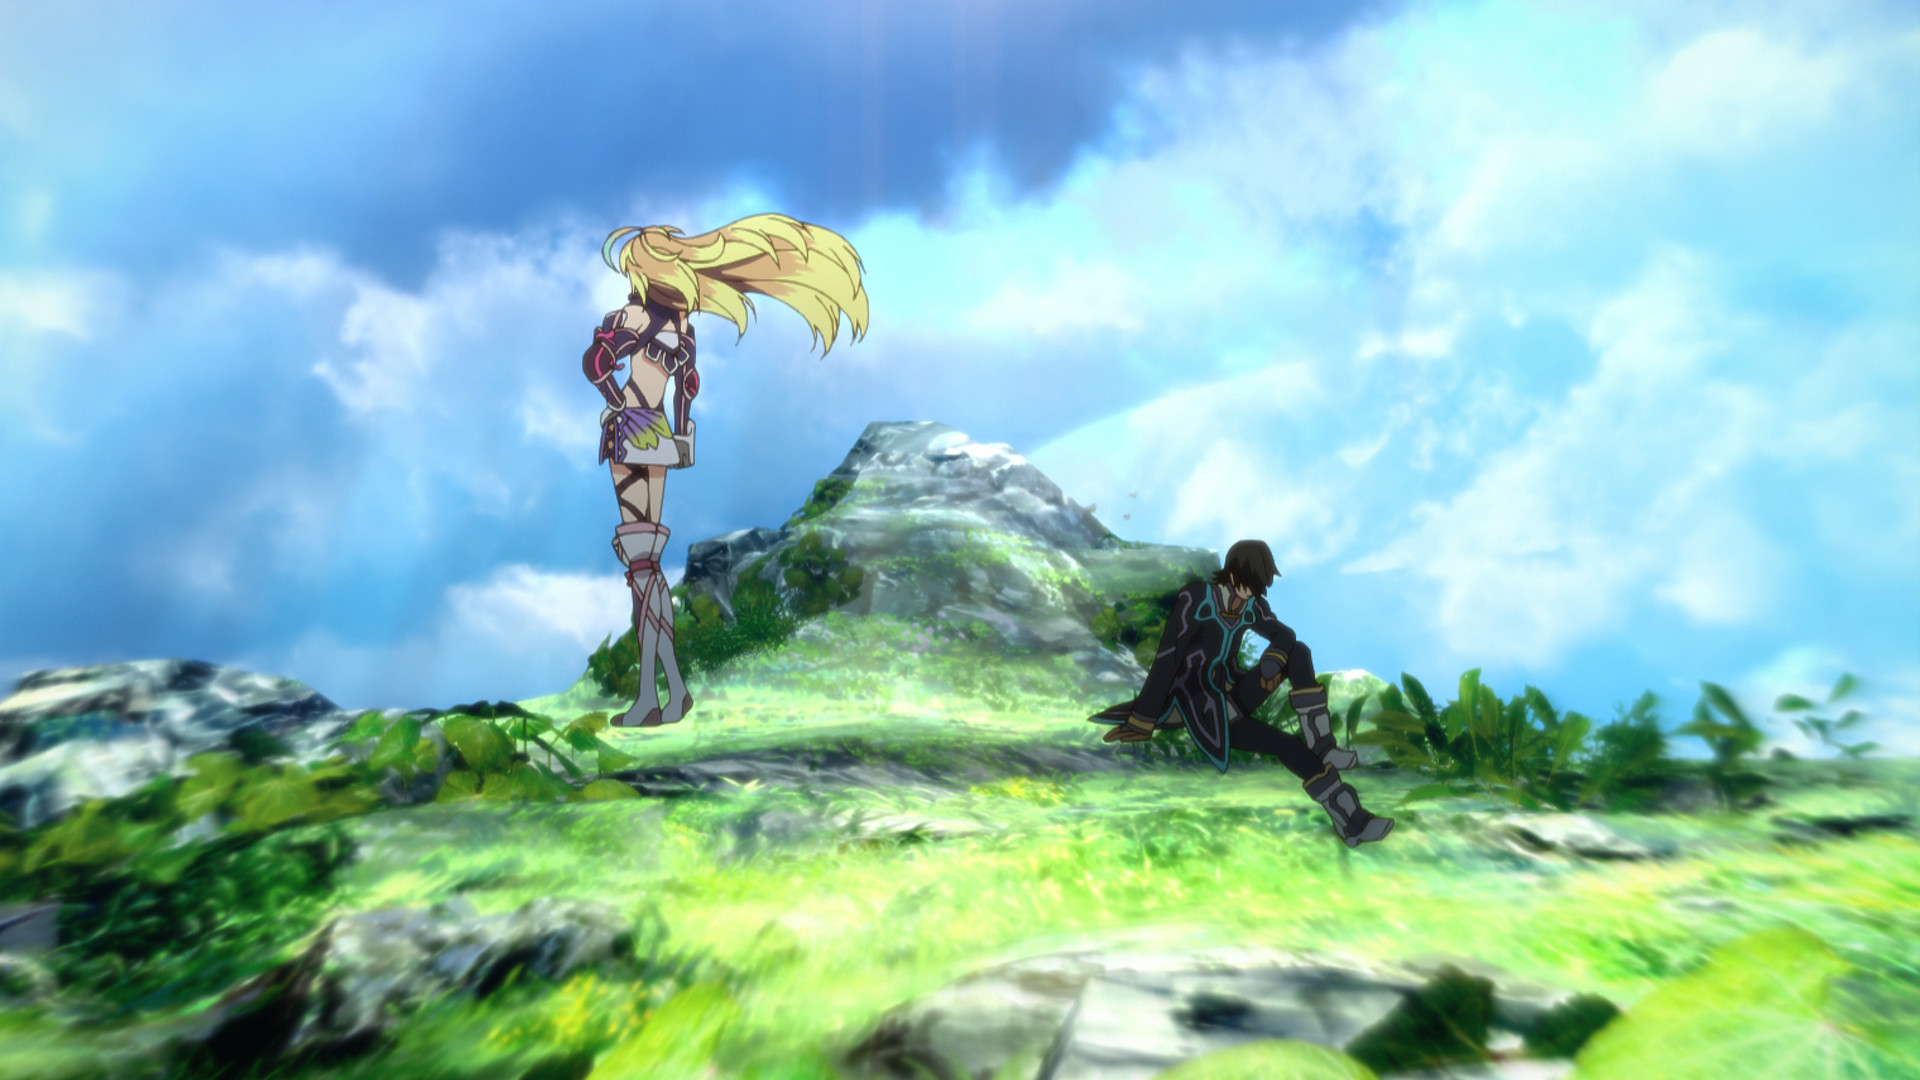 Tales of xillia wallpaper for you rtales